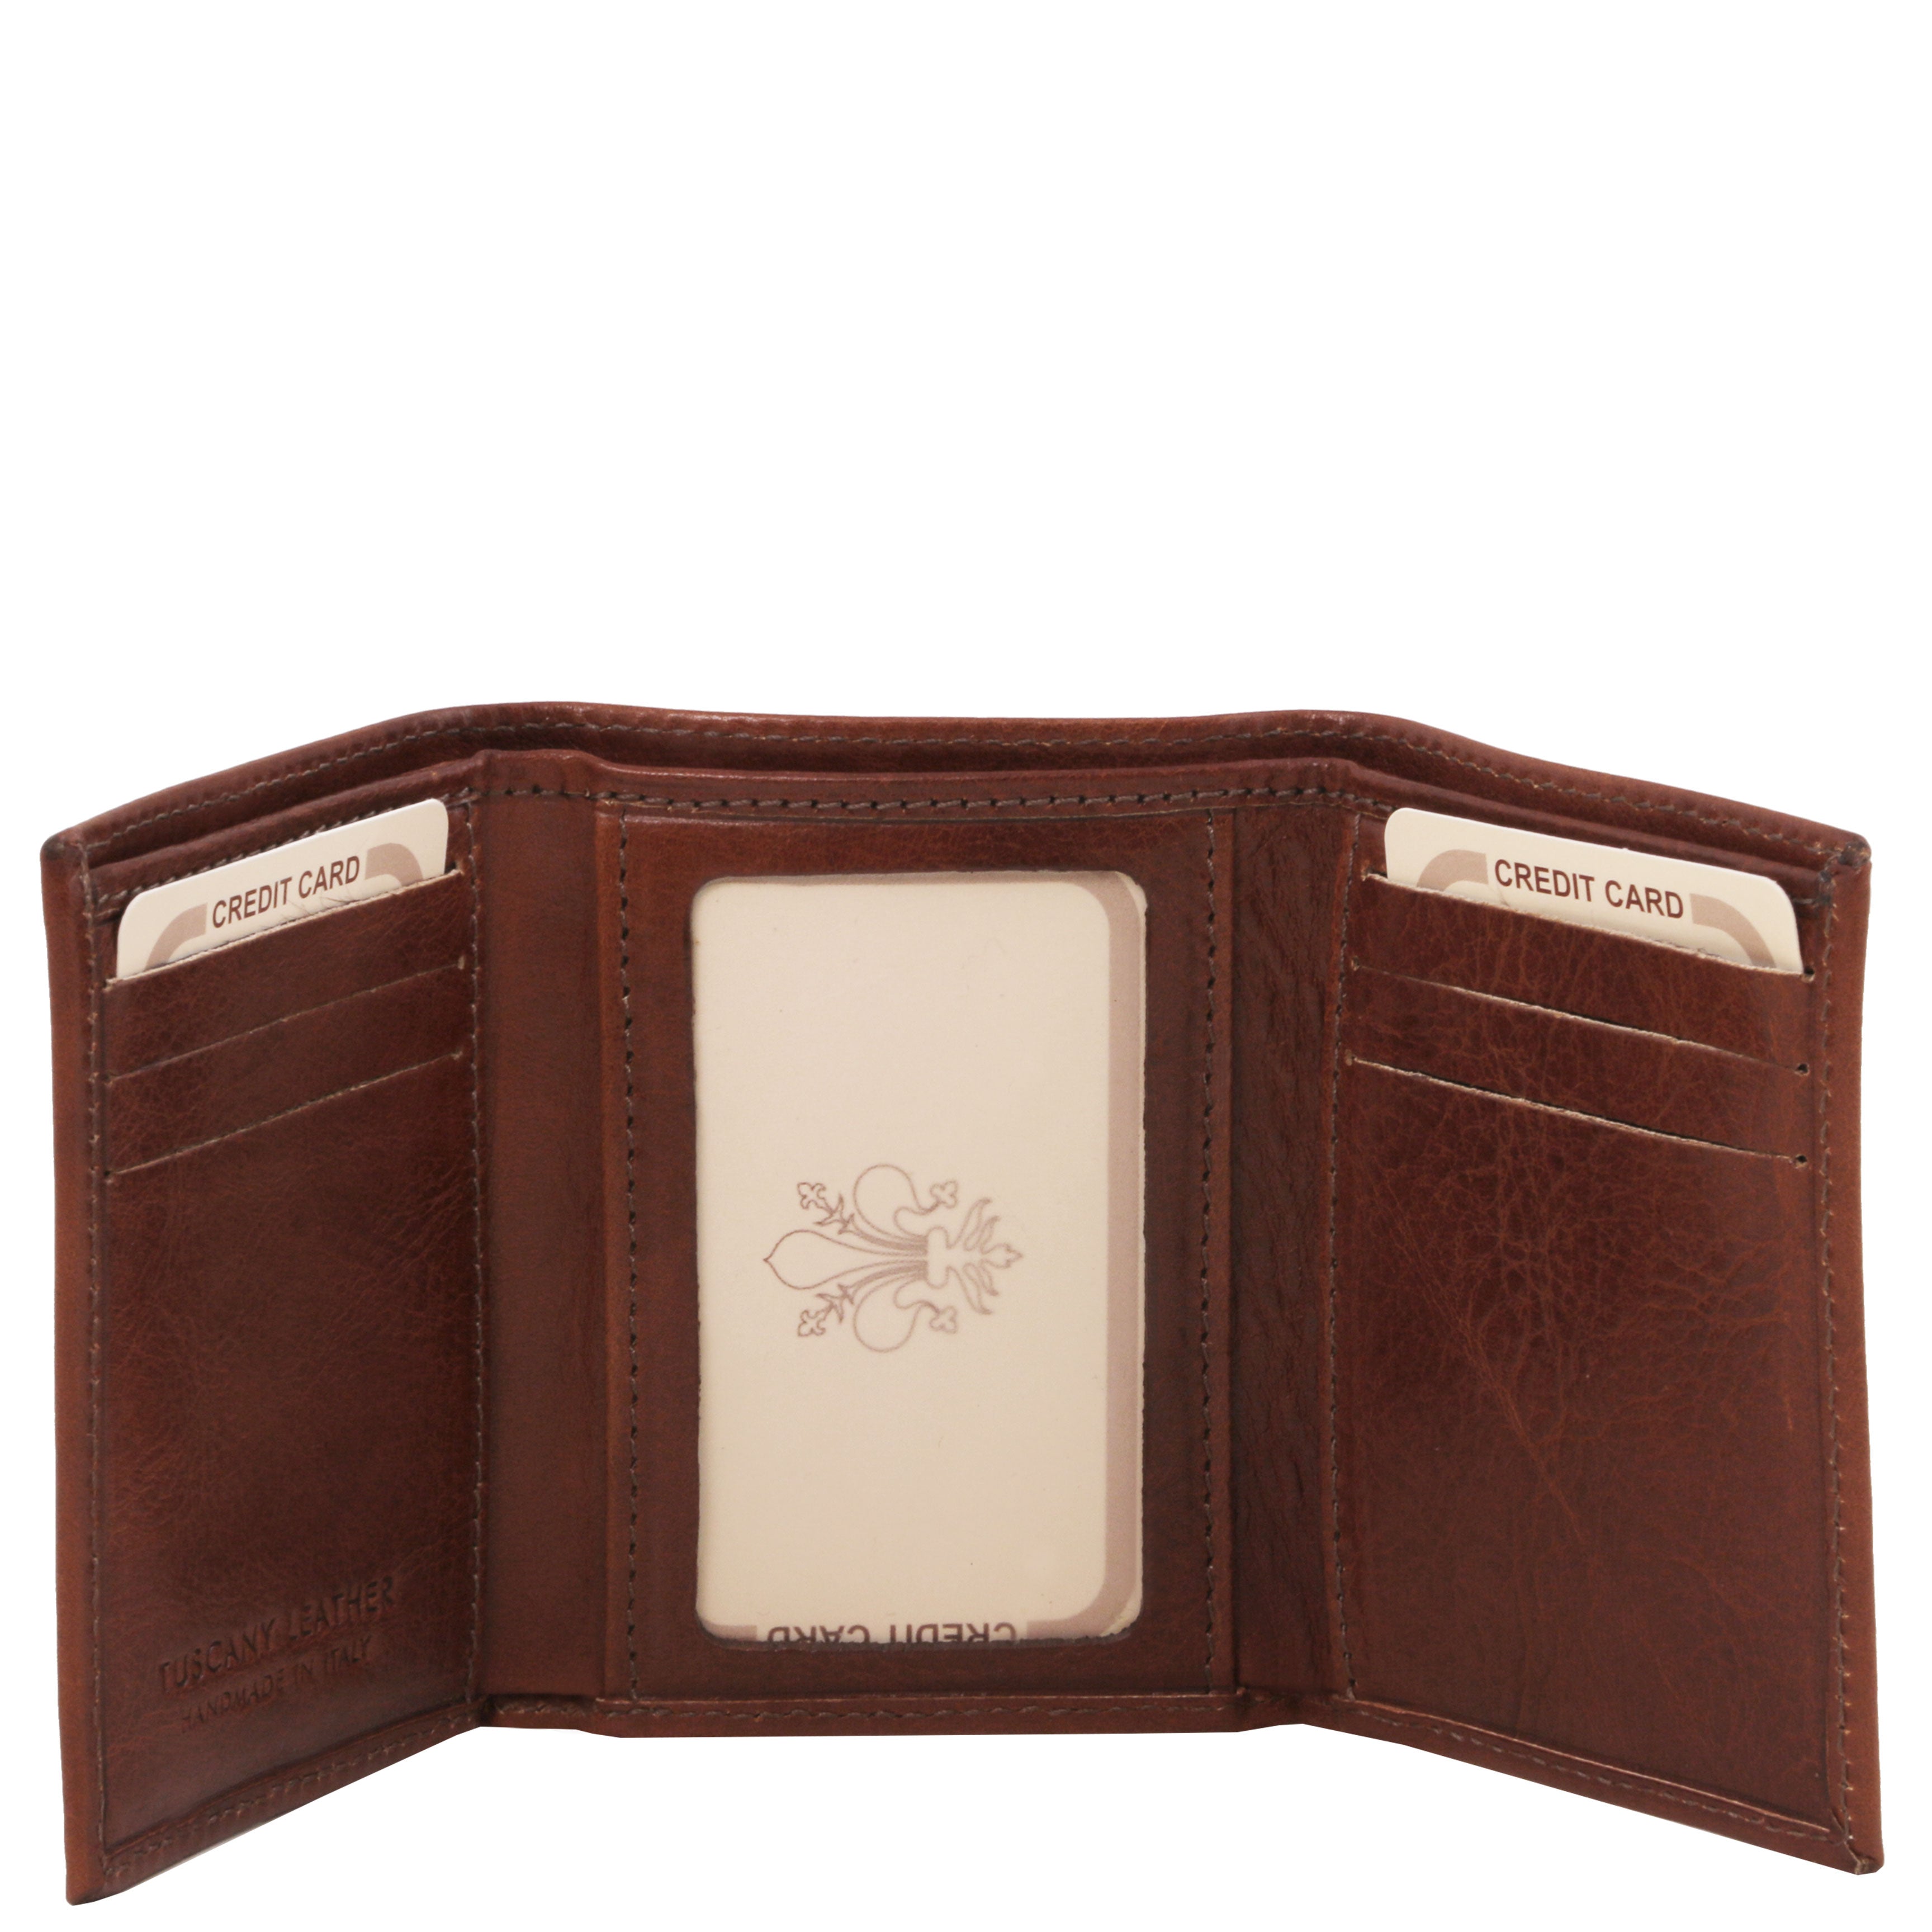 Portefeuille en cuir marron ⎪Tuscany Leather